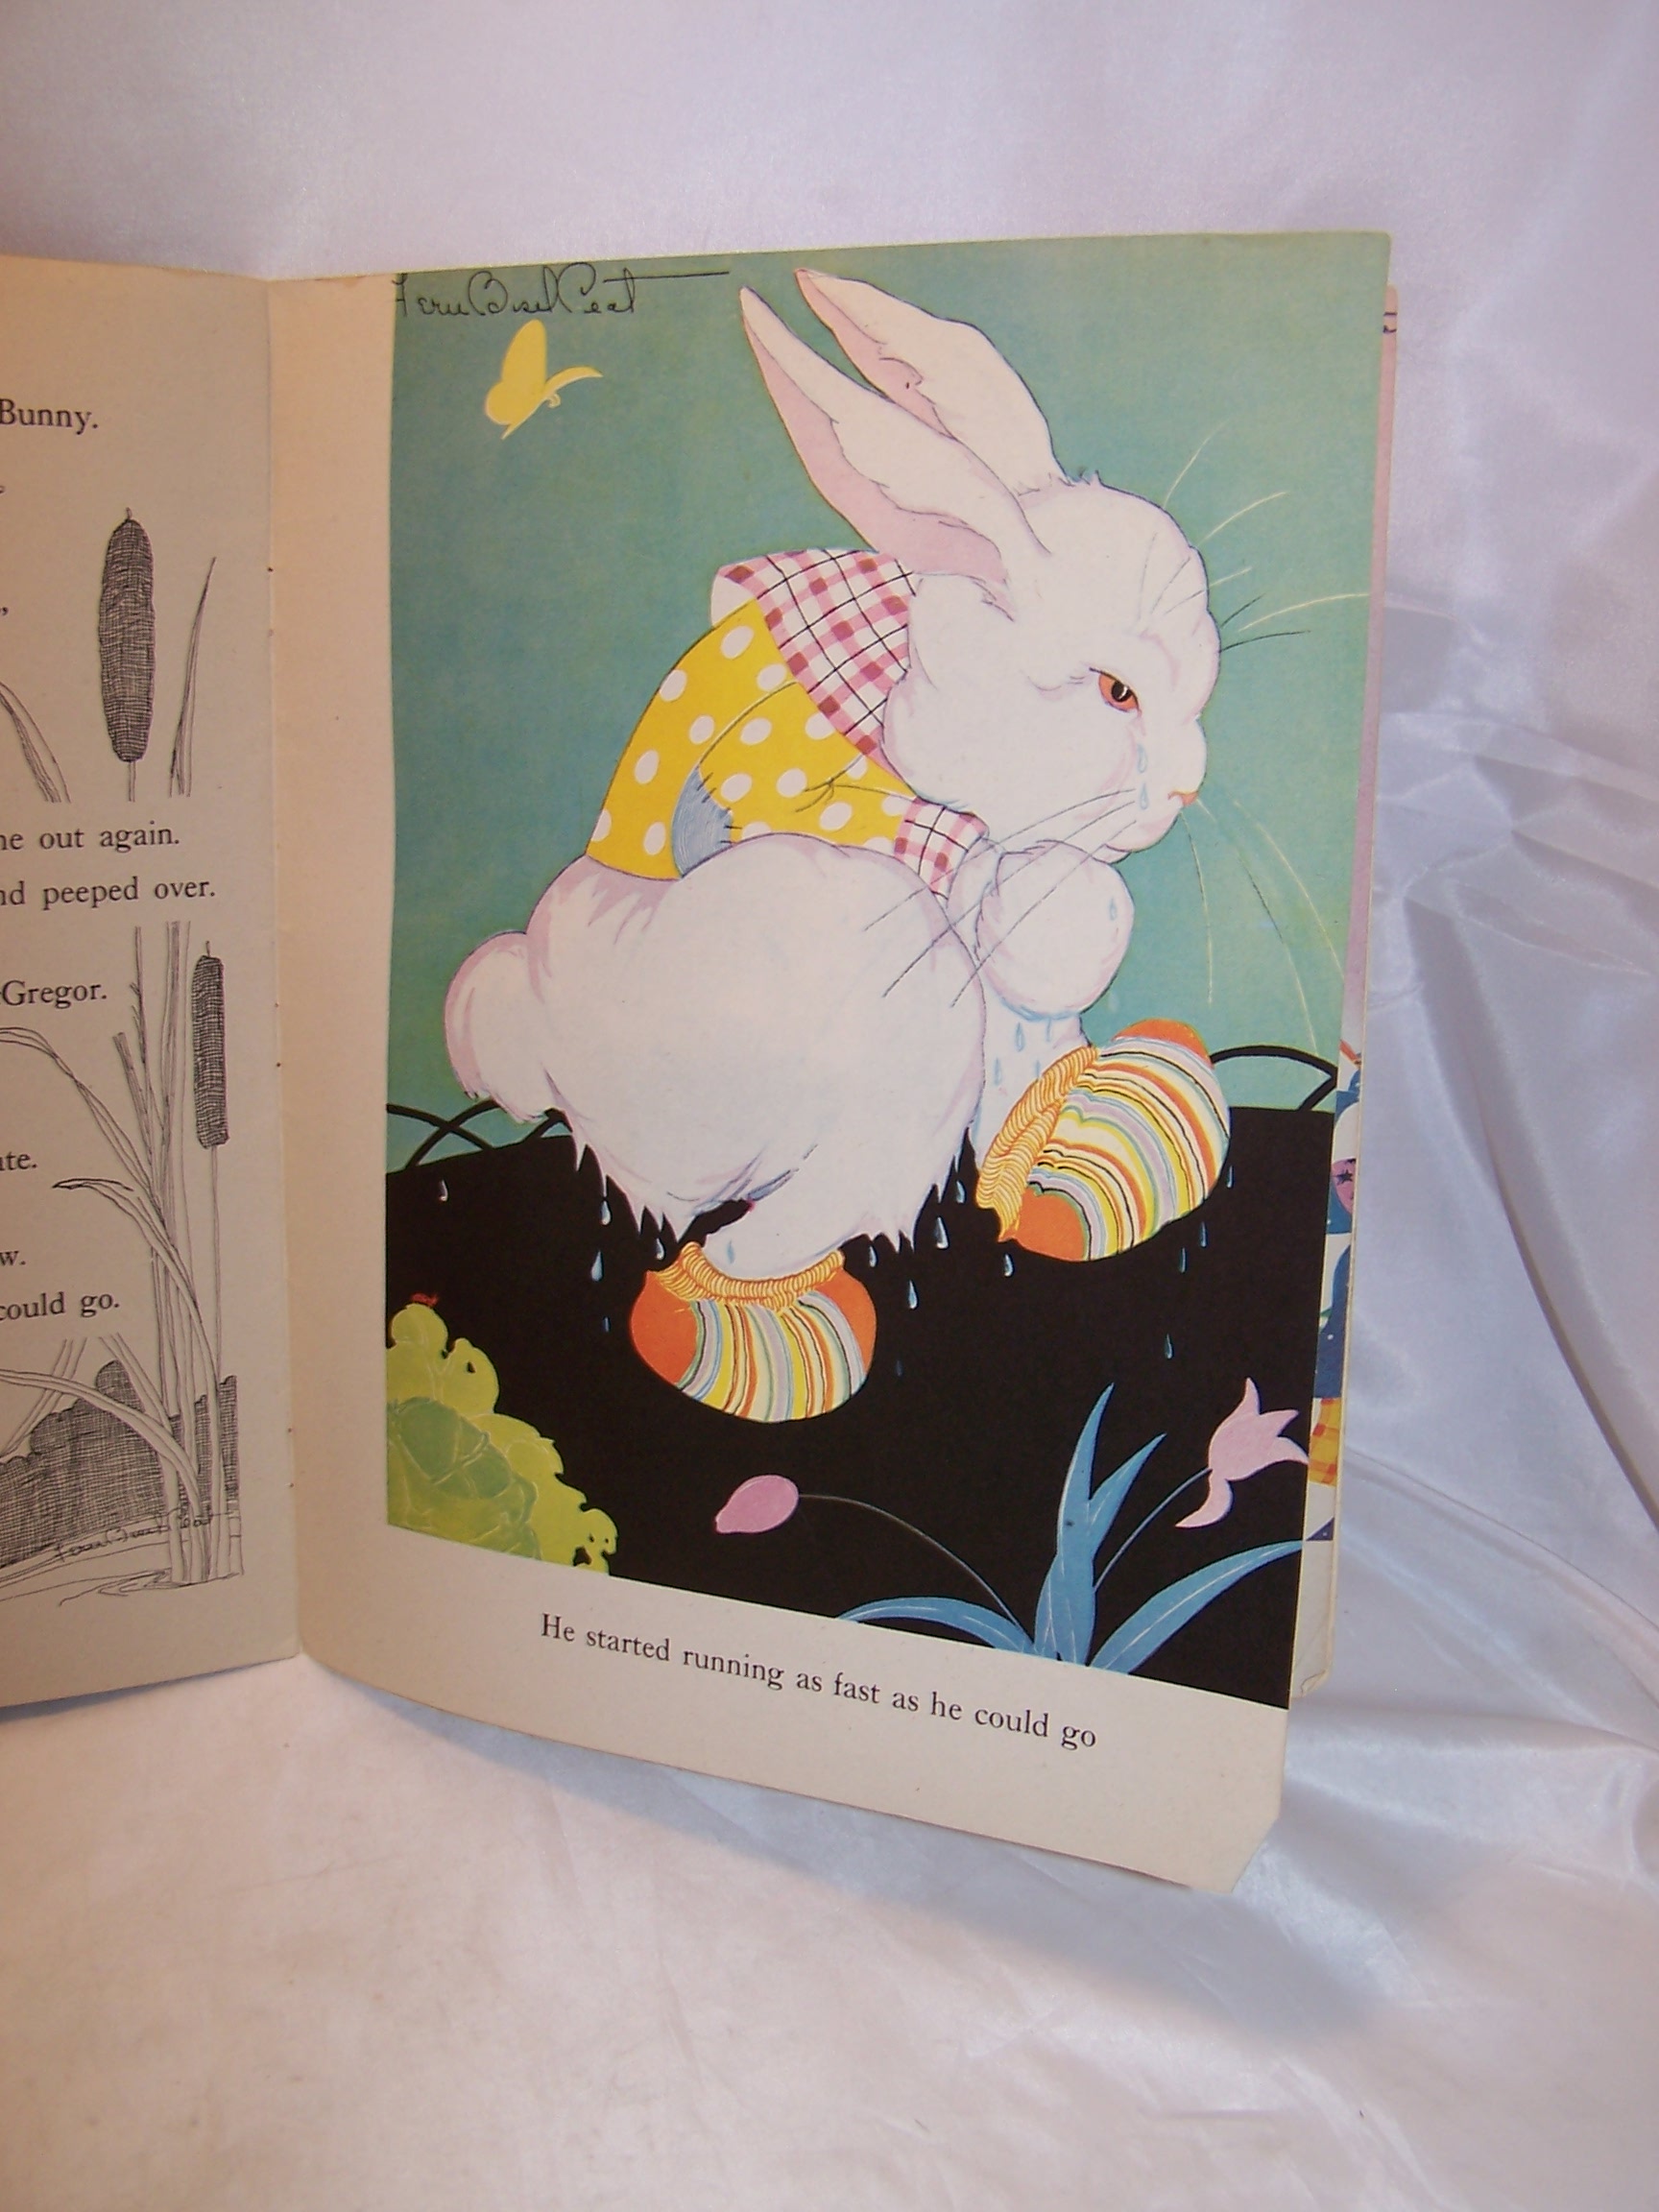 Image 8 of Peter Rabbit Book, Storybook, 1946, Aldredge and McKee, Prang Company Publishers